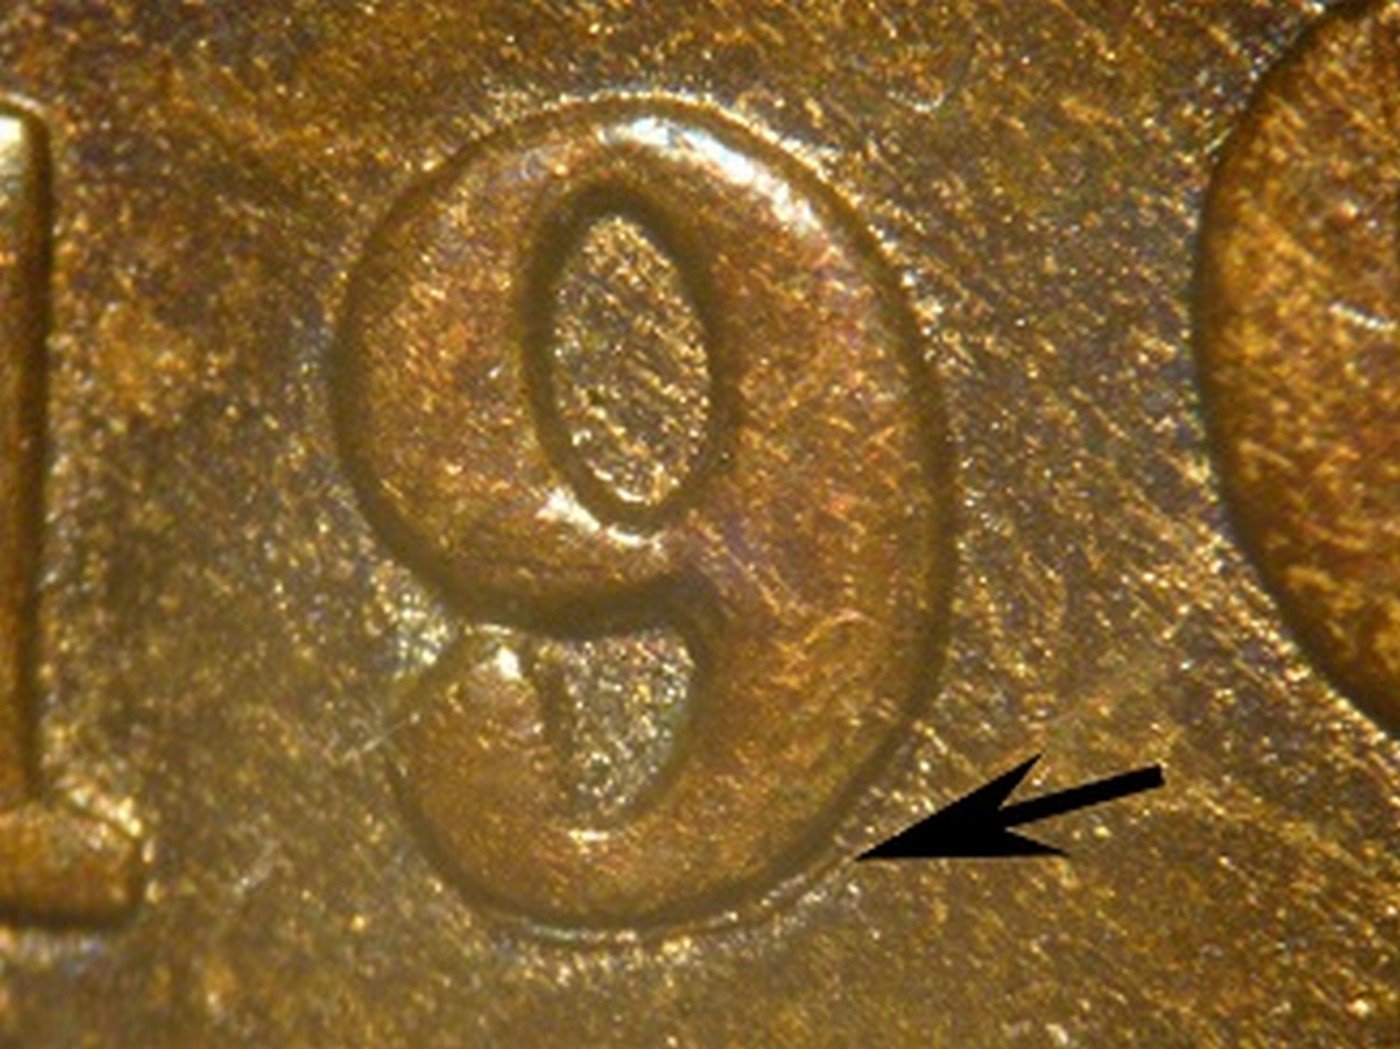 1906 RPD-012 - Indian Head Penny - Photo by David Poliquin